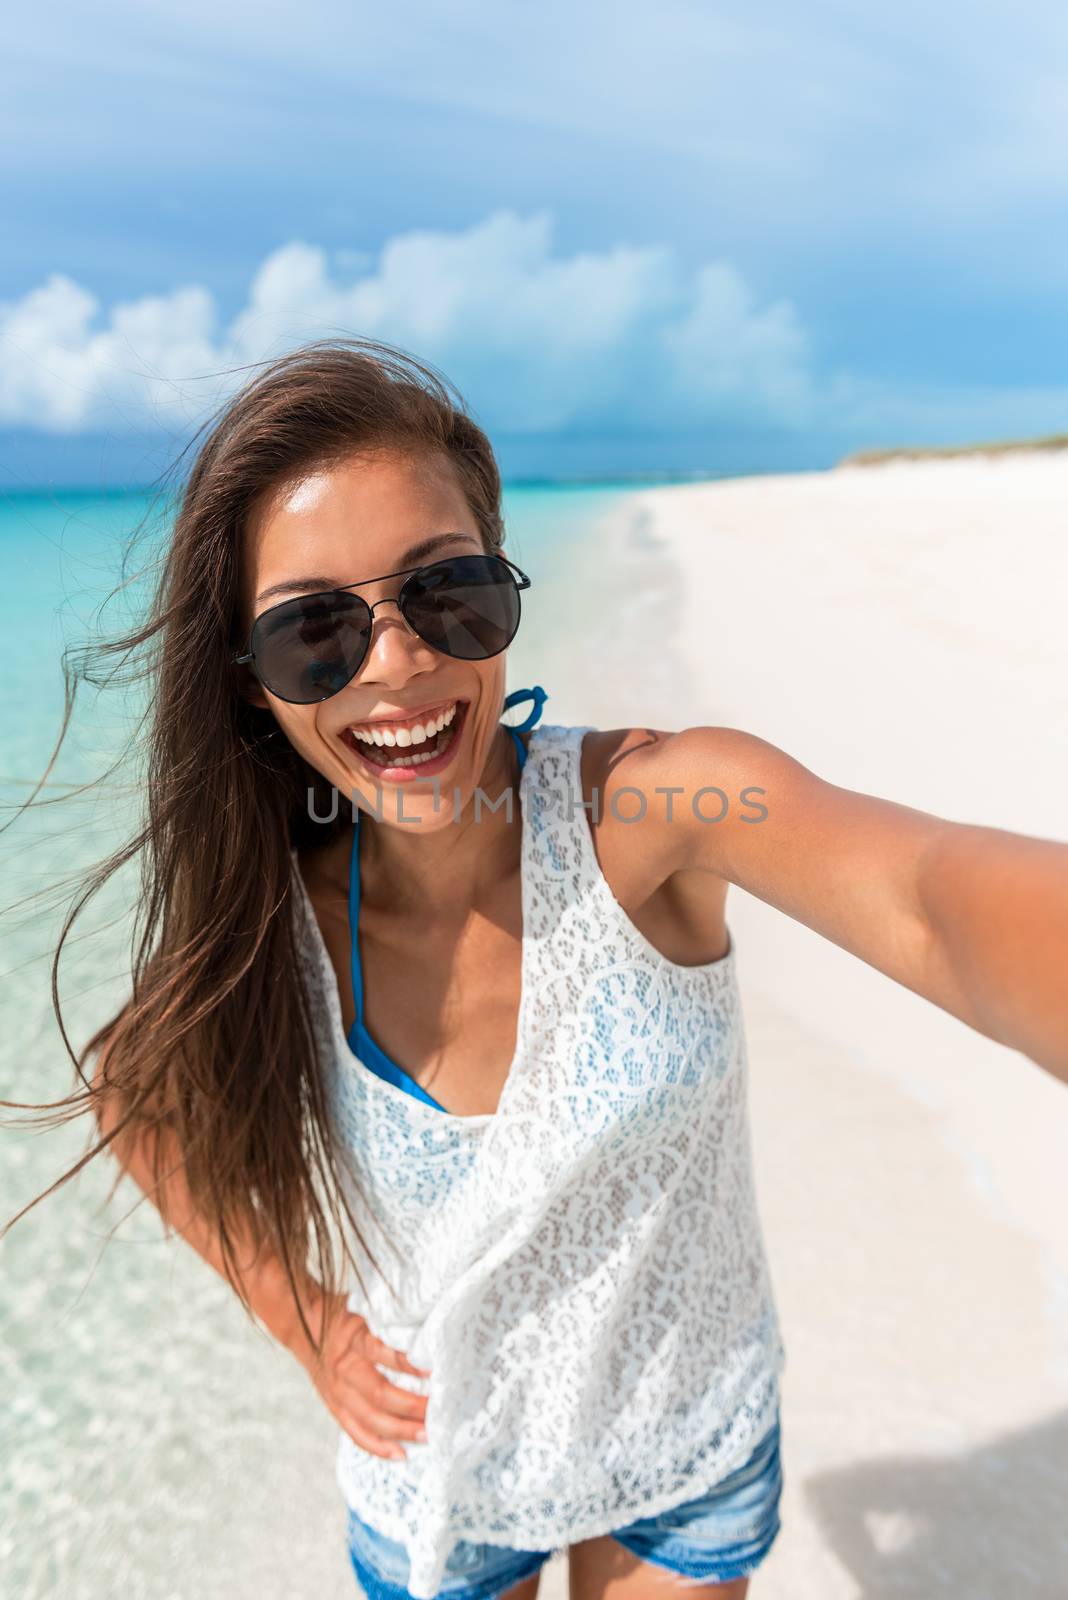 Beach selfie young Asian woman taking fun photo with phone on Caribbean tropical summer holidays. Girl wearing sunglasses.